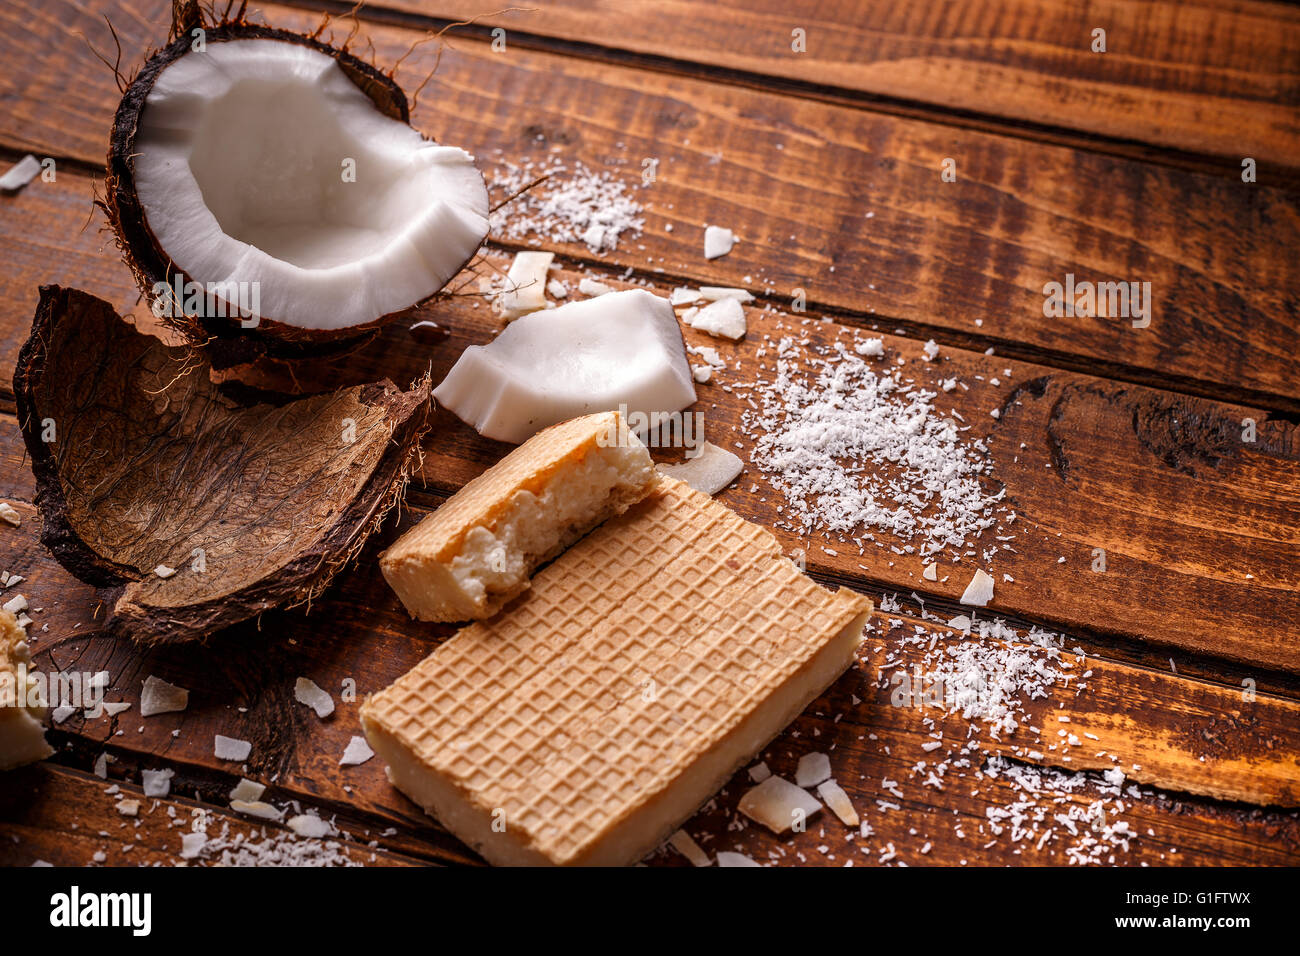 Homemade chocolate wafers on wooden background Stock Photo